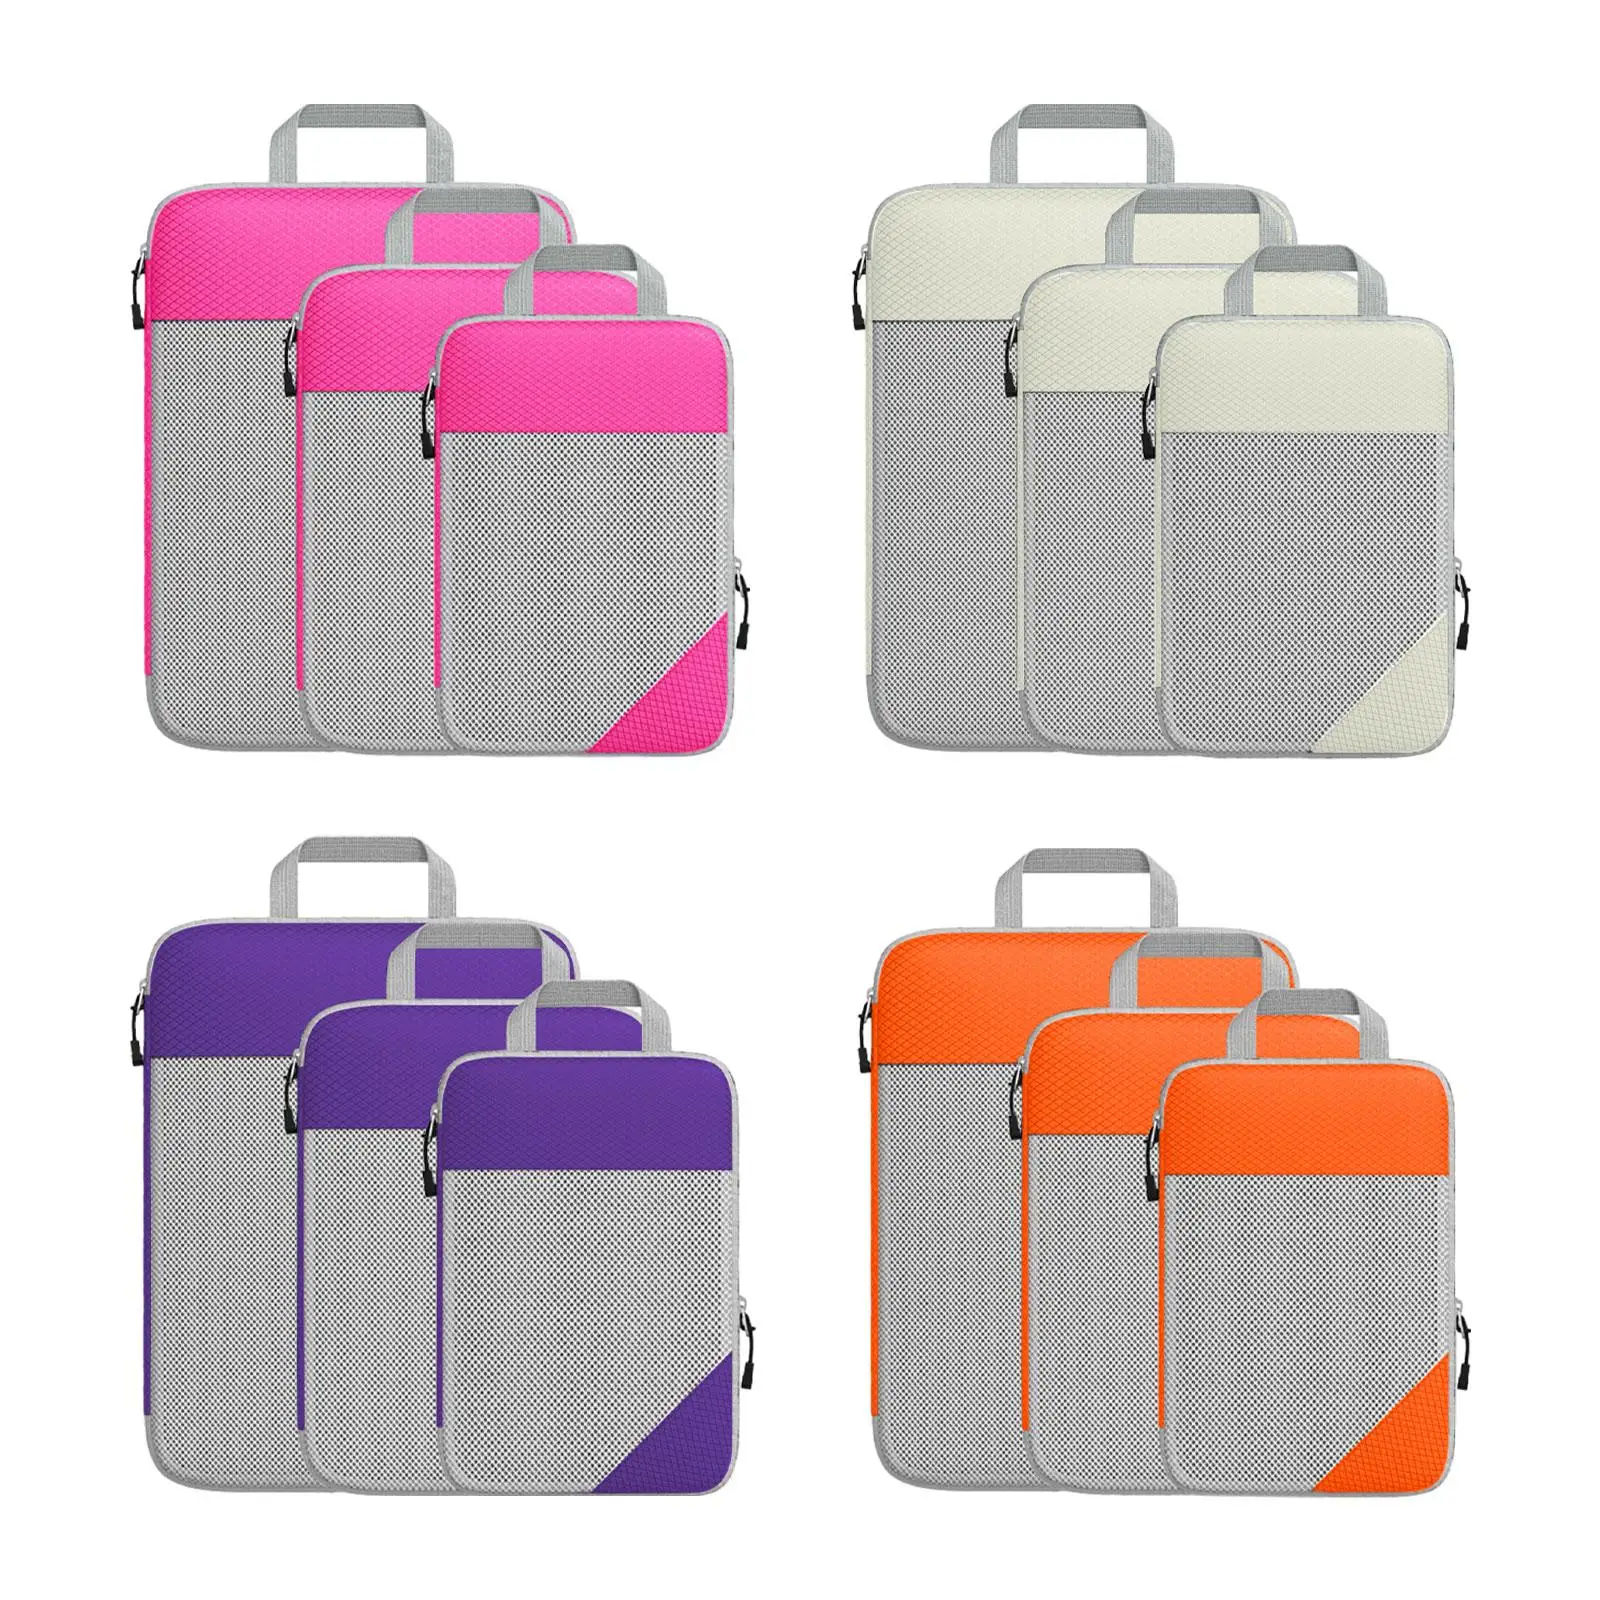 3Pcs Compression Packing Cubes Travel Organizer Cubes for Family Vacations